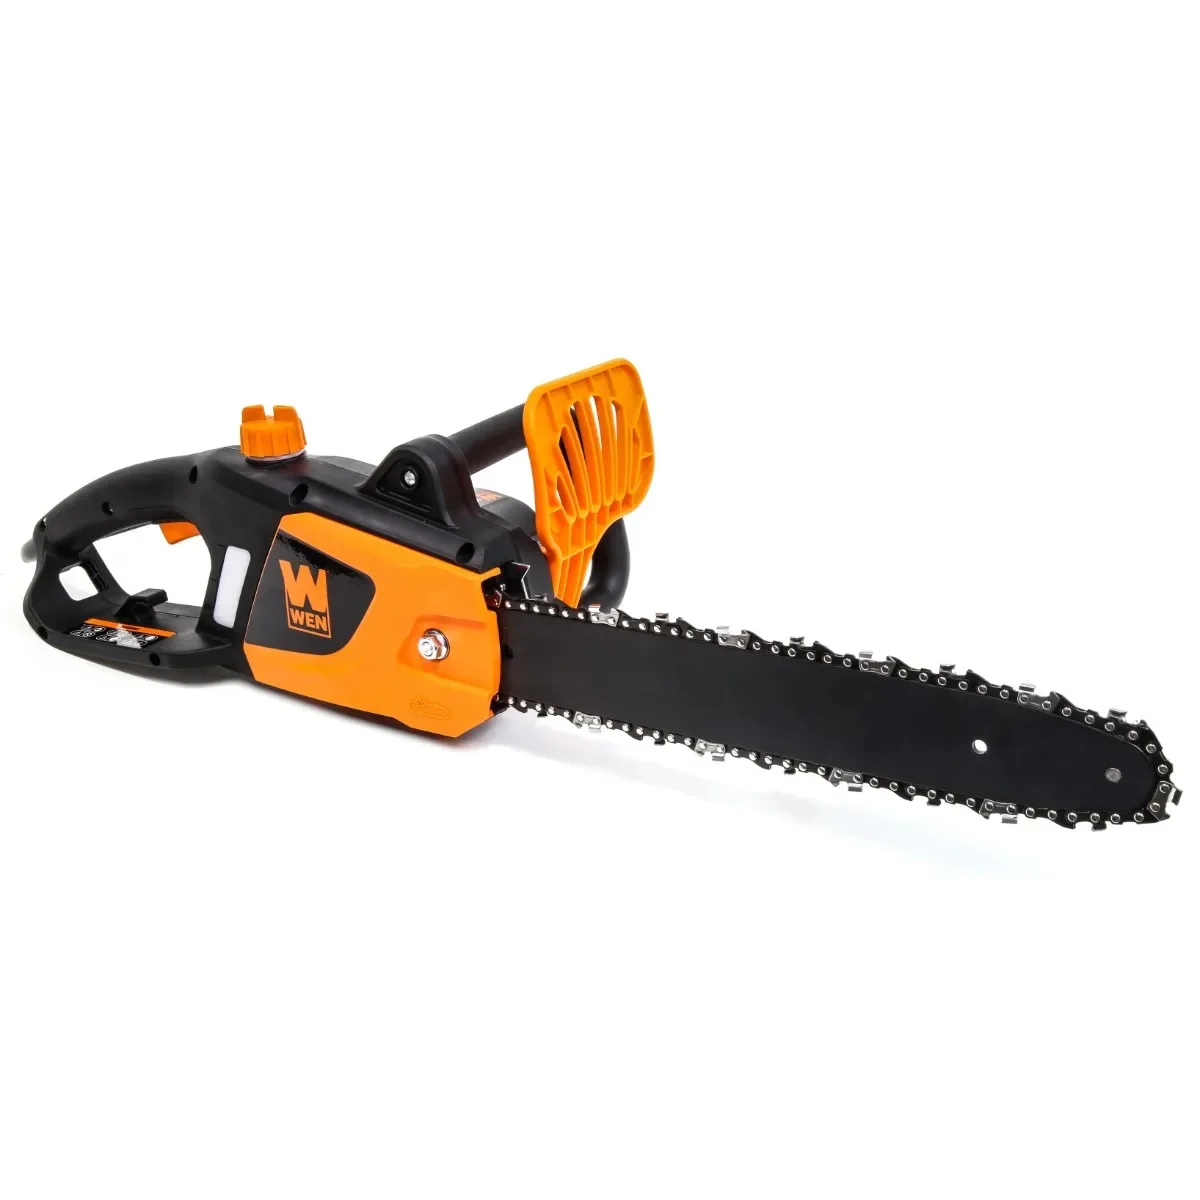 

WEN 9-Amp 14-Inch Electric Chainsaw power tools chainsaws saw | USA | NEW